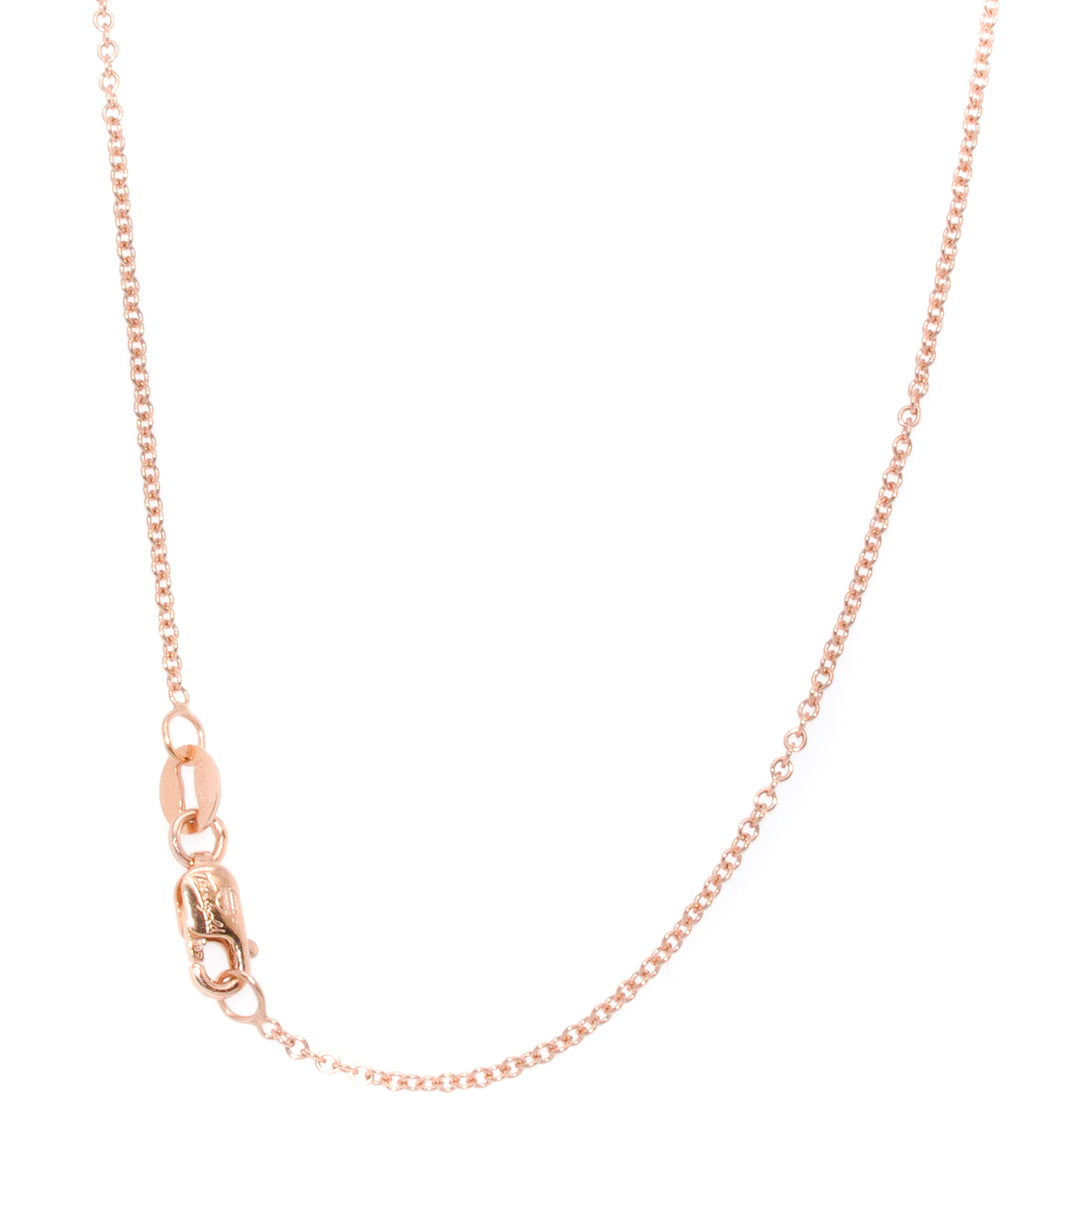 10KT Rose Gold 18" 1.7mm Rolo Chain.